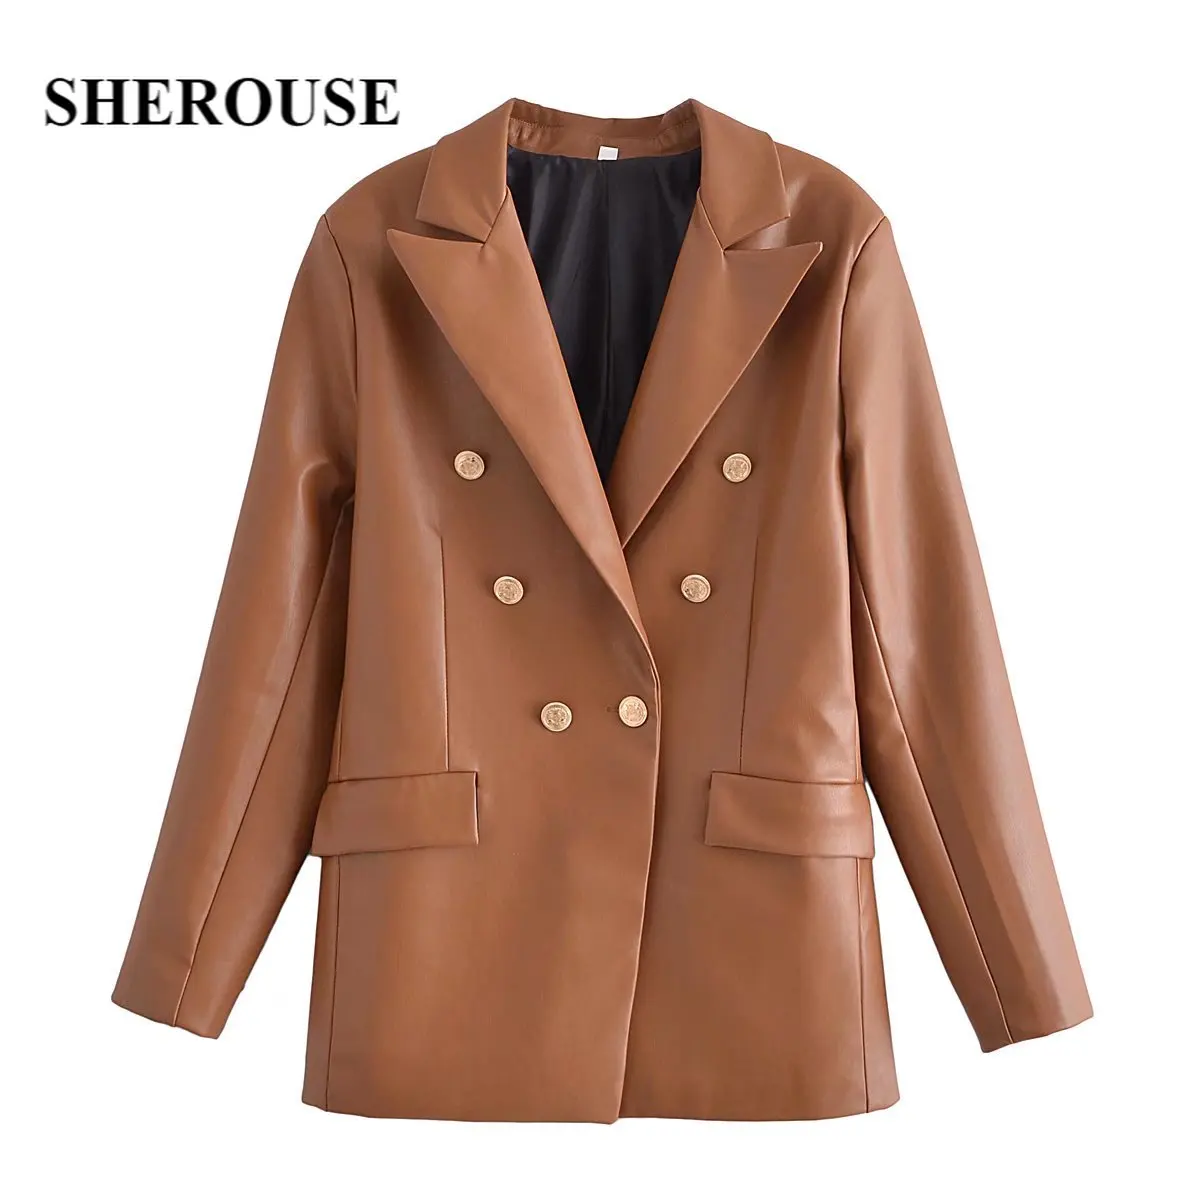 

SHEROUSE Women Fashion PU Solid Double Breasted Blazer Vintage Notched Neck Long Sleeves Office Lady Suit veste femme